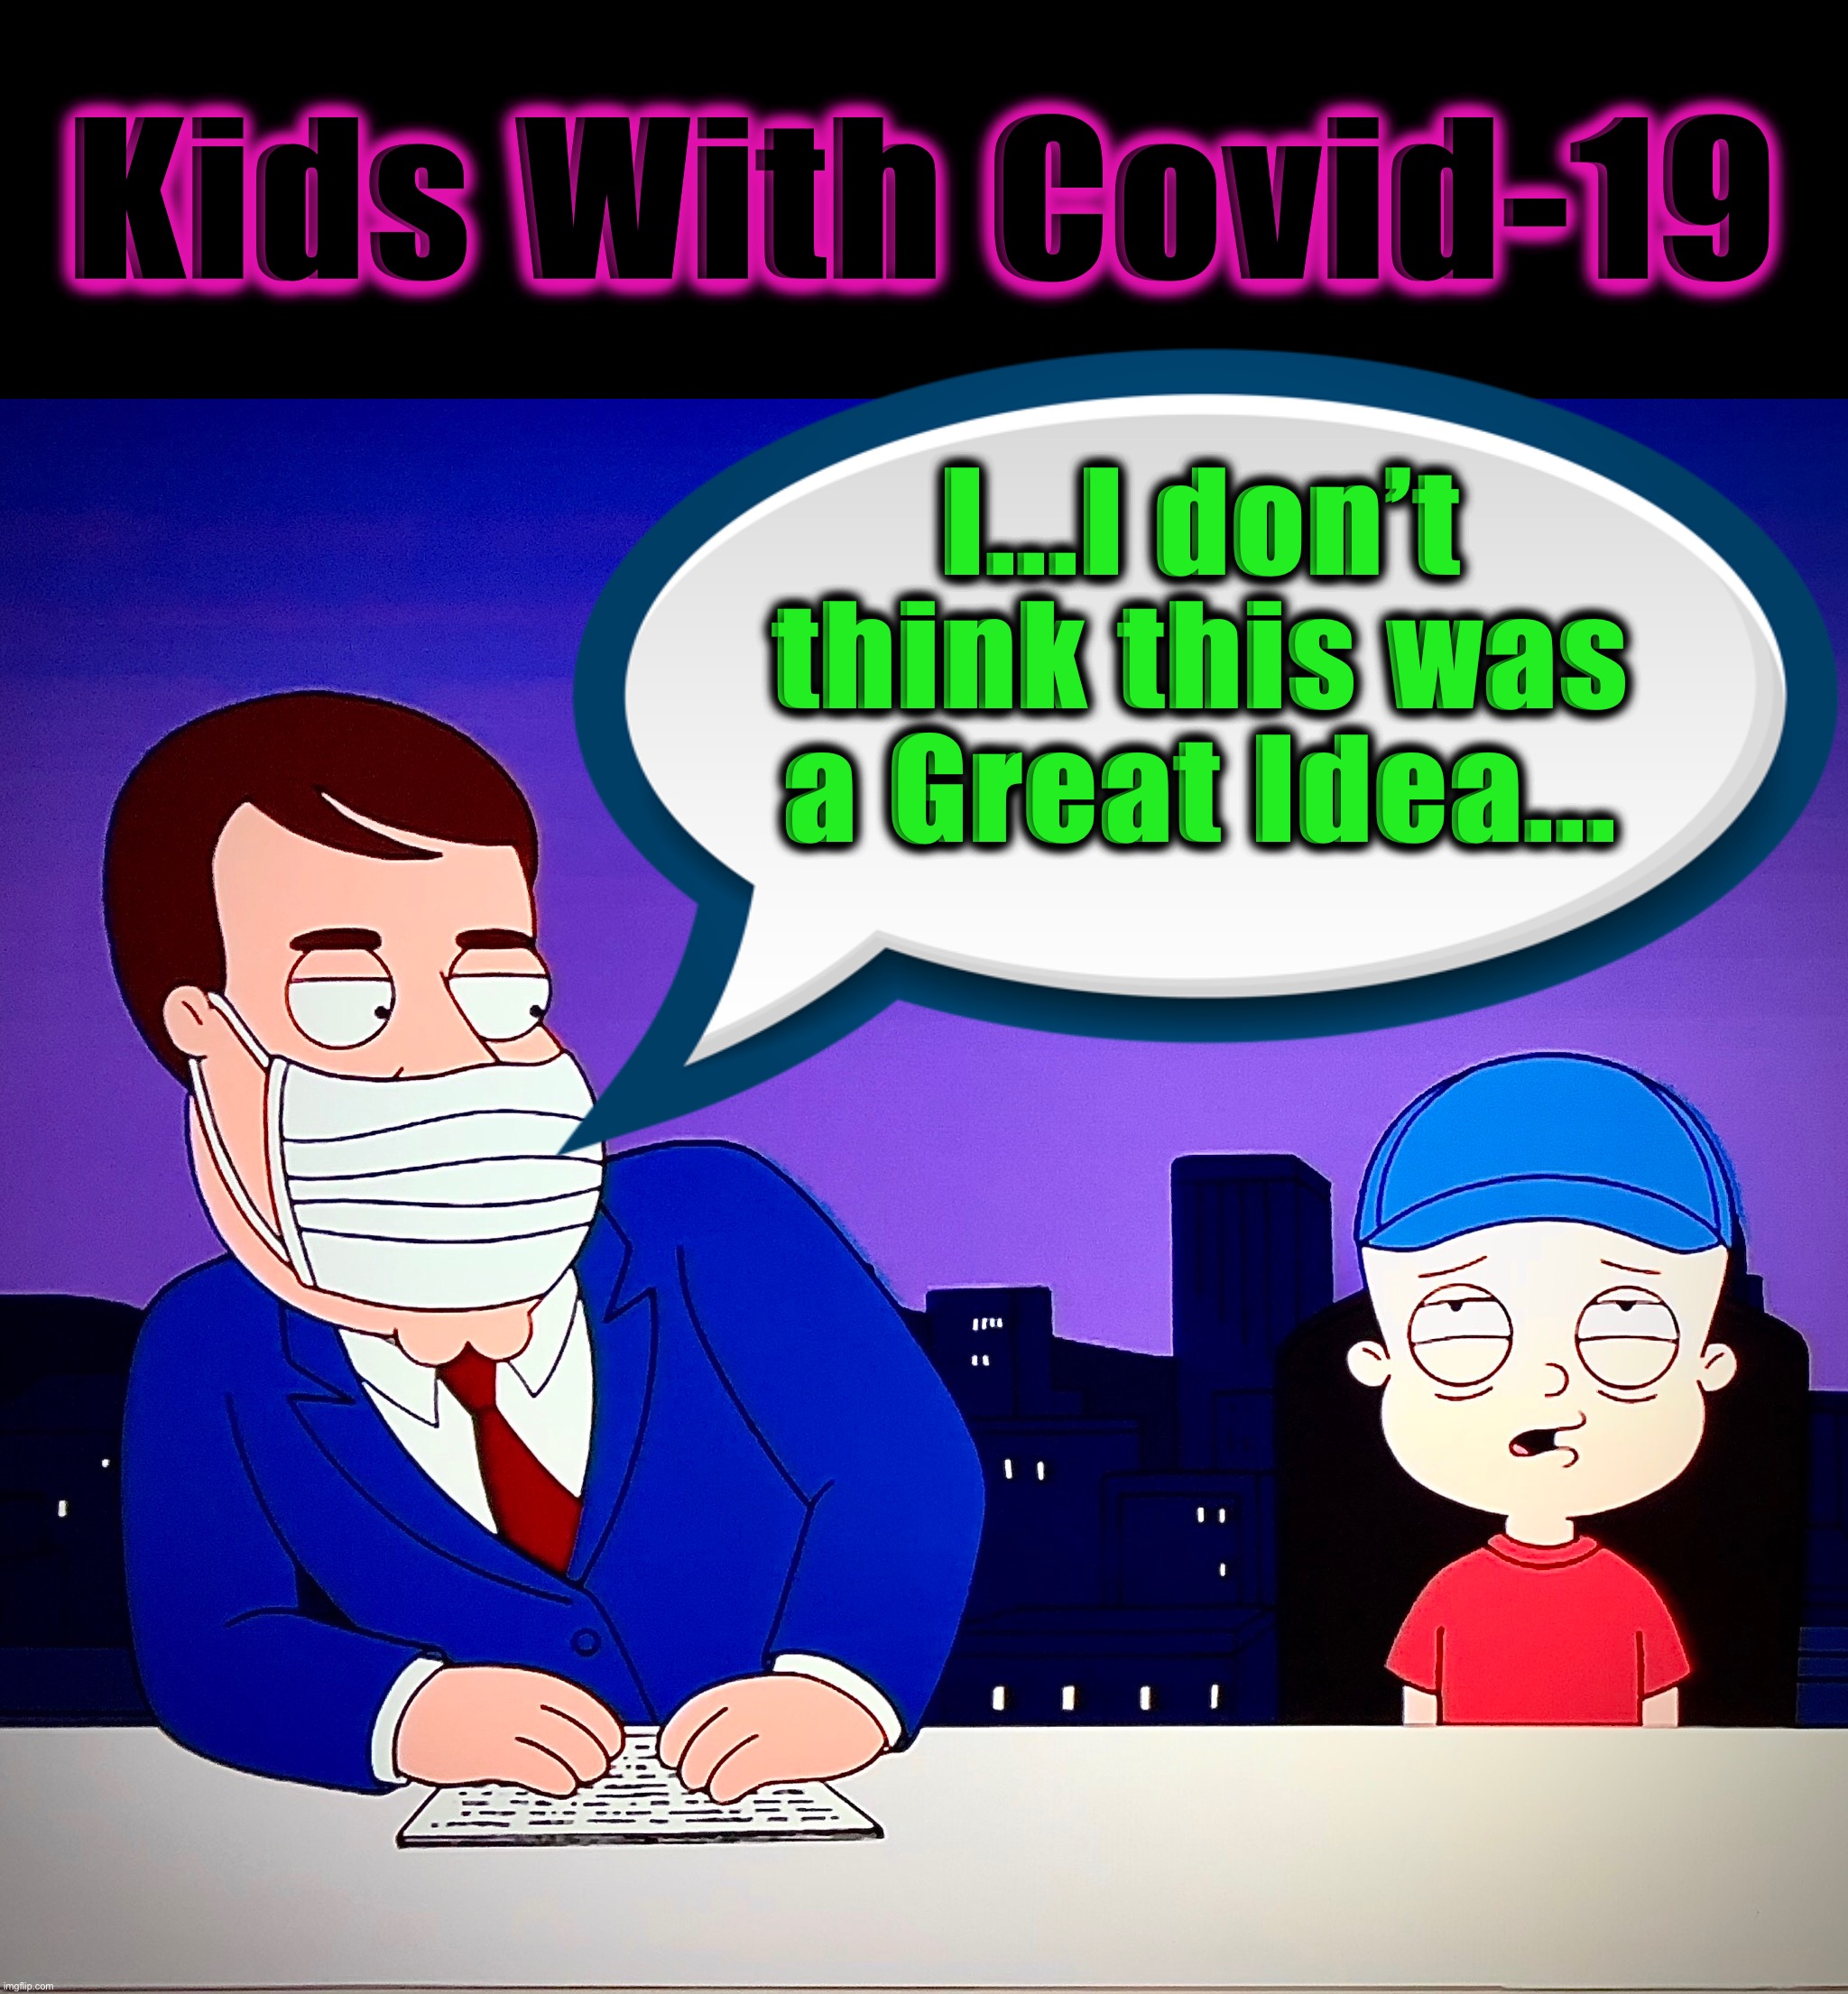 He’s Gonna Sneeze |  Kids With Covid-19; I...I don’t think this was a Great Idea... | image tagged in covid-19,coronavirus meme,memes,family guy,world war c,breaking news | made w/ Imgflip meme maker